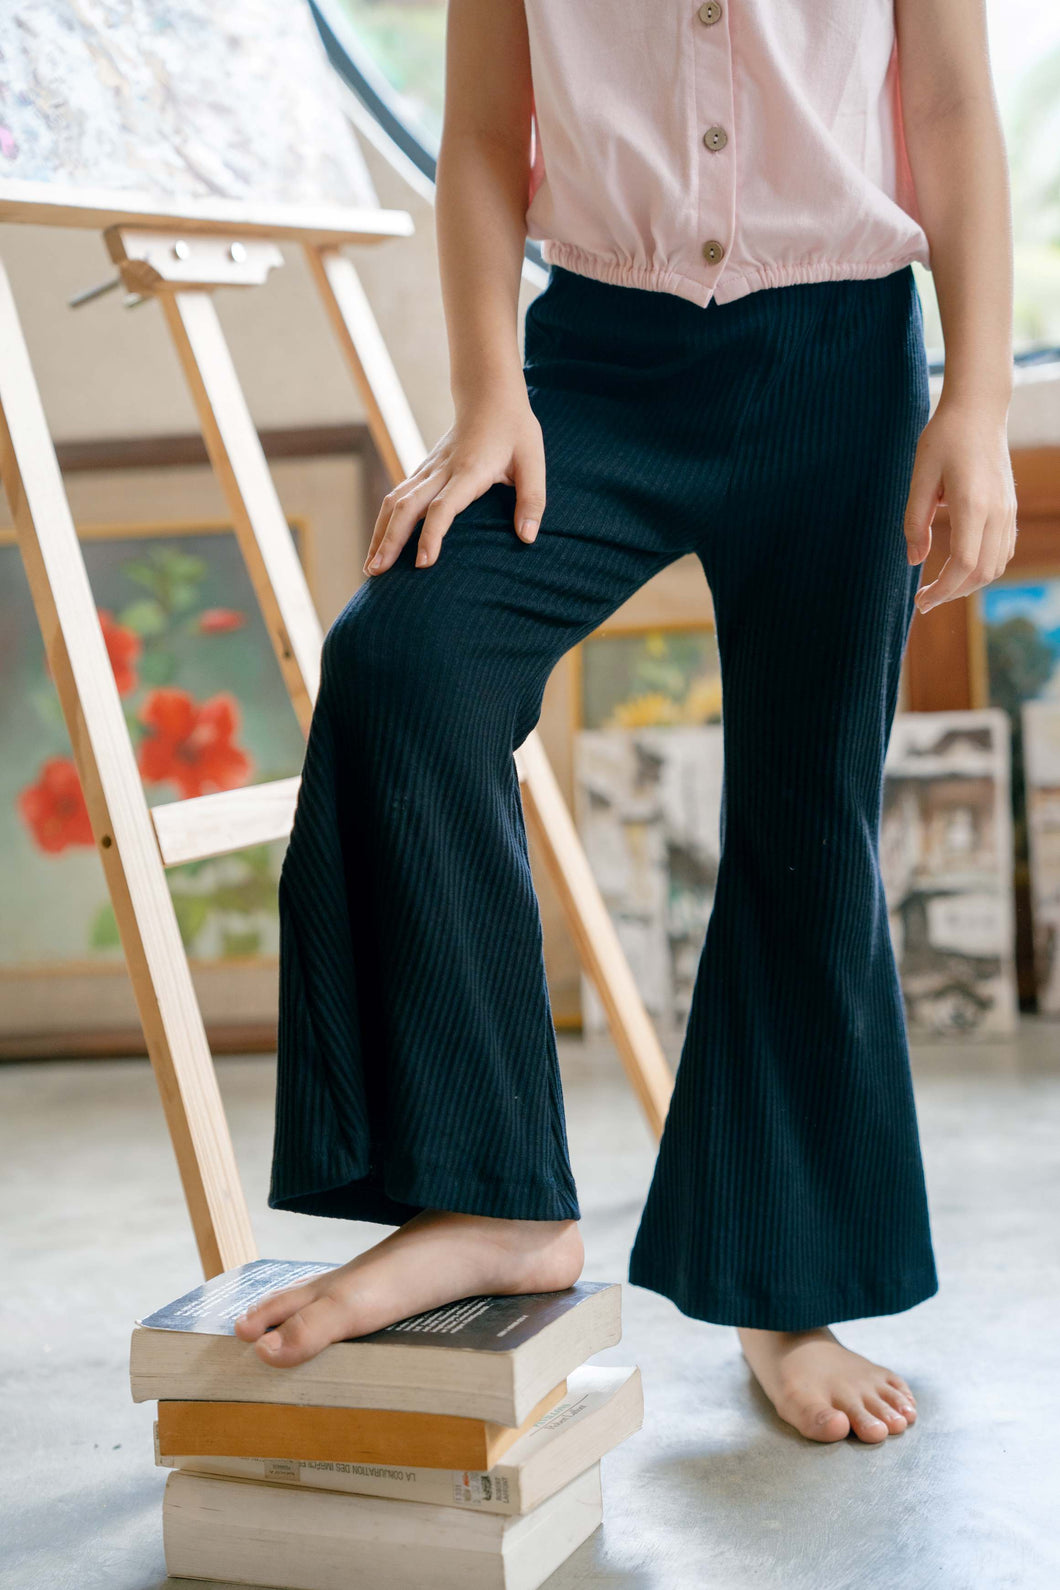 Cutbray / Flare Pant Monocrome